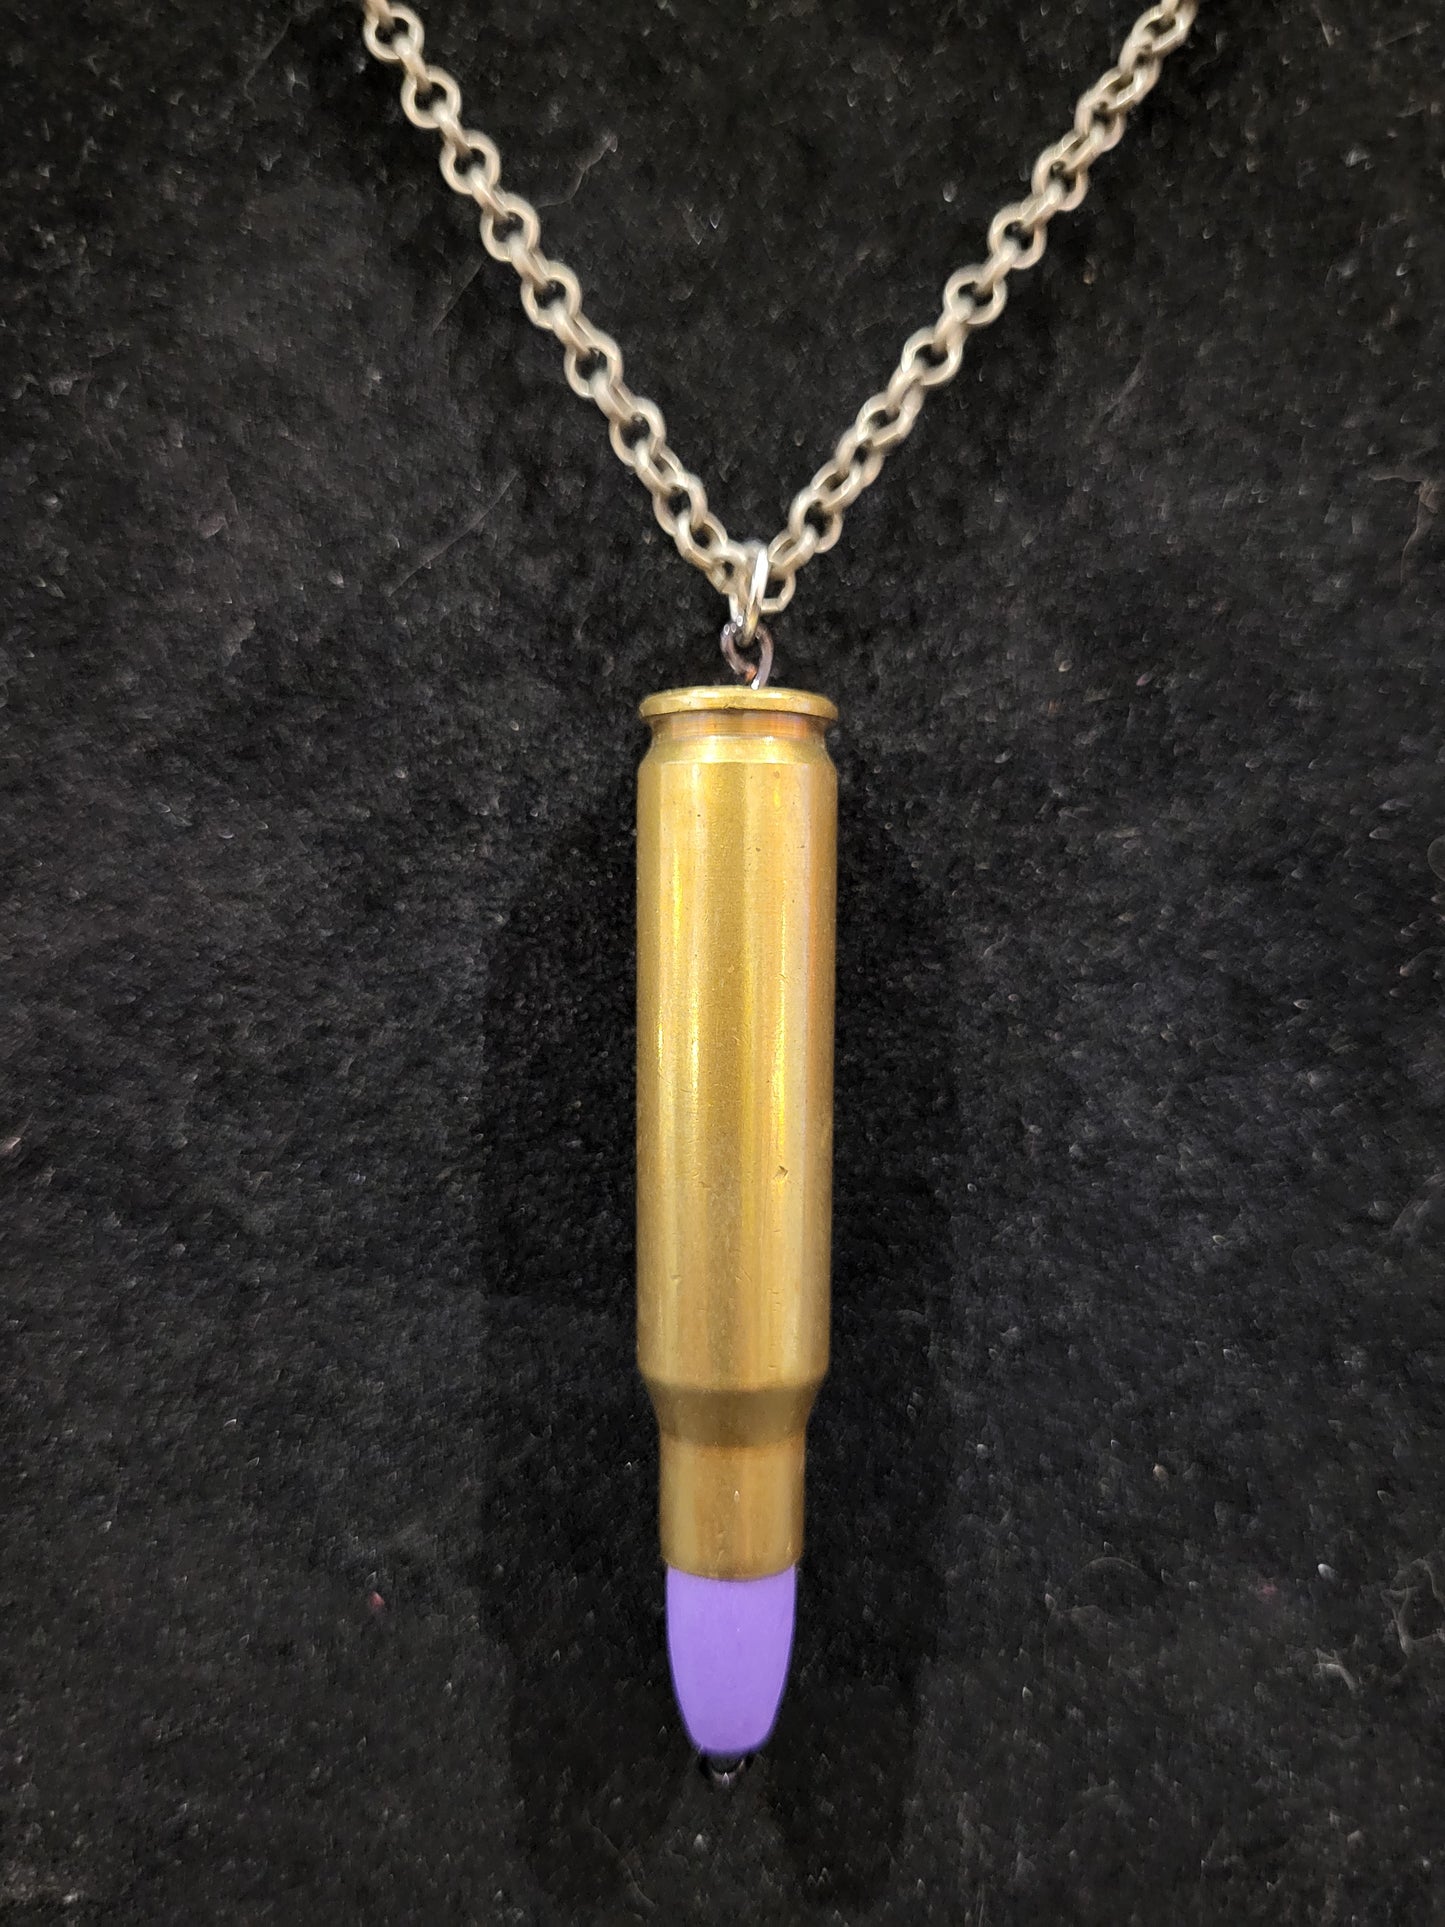 Handmade bullet casing necklace with purple wooden bead